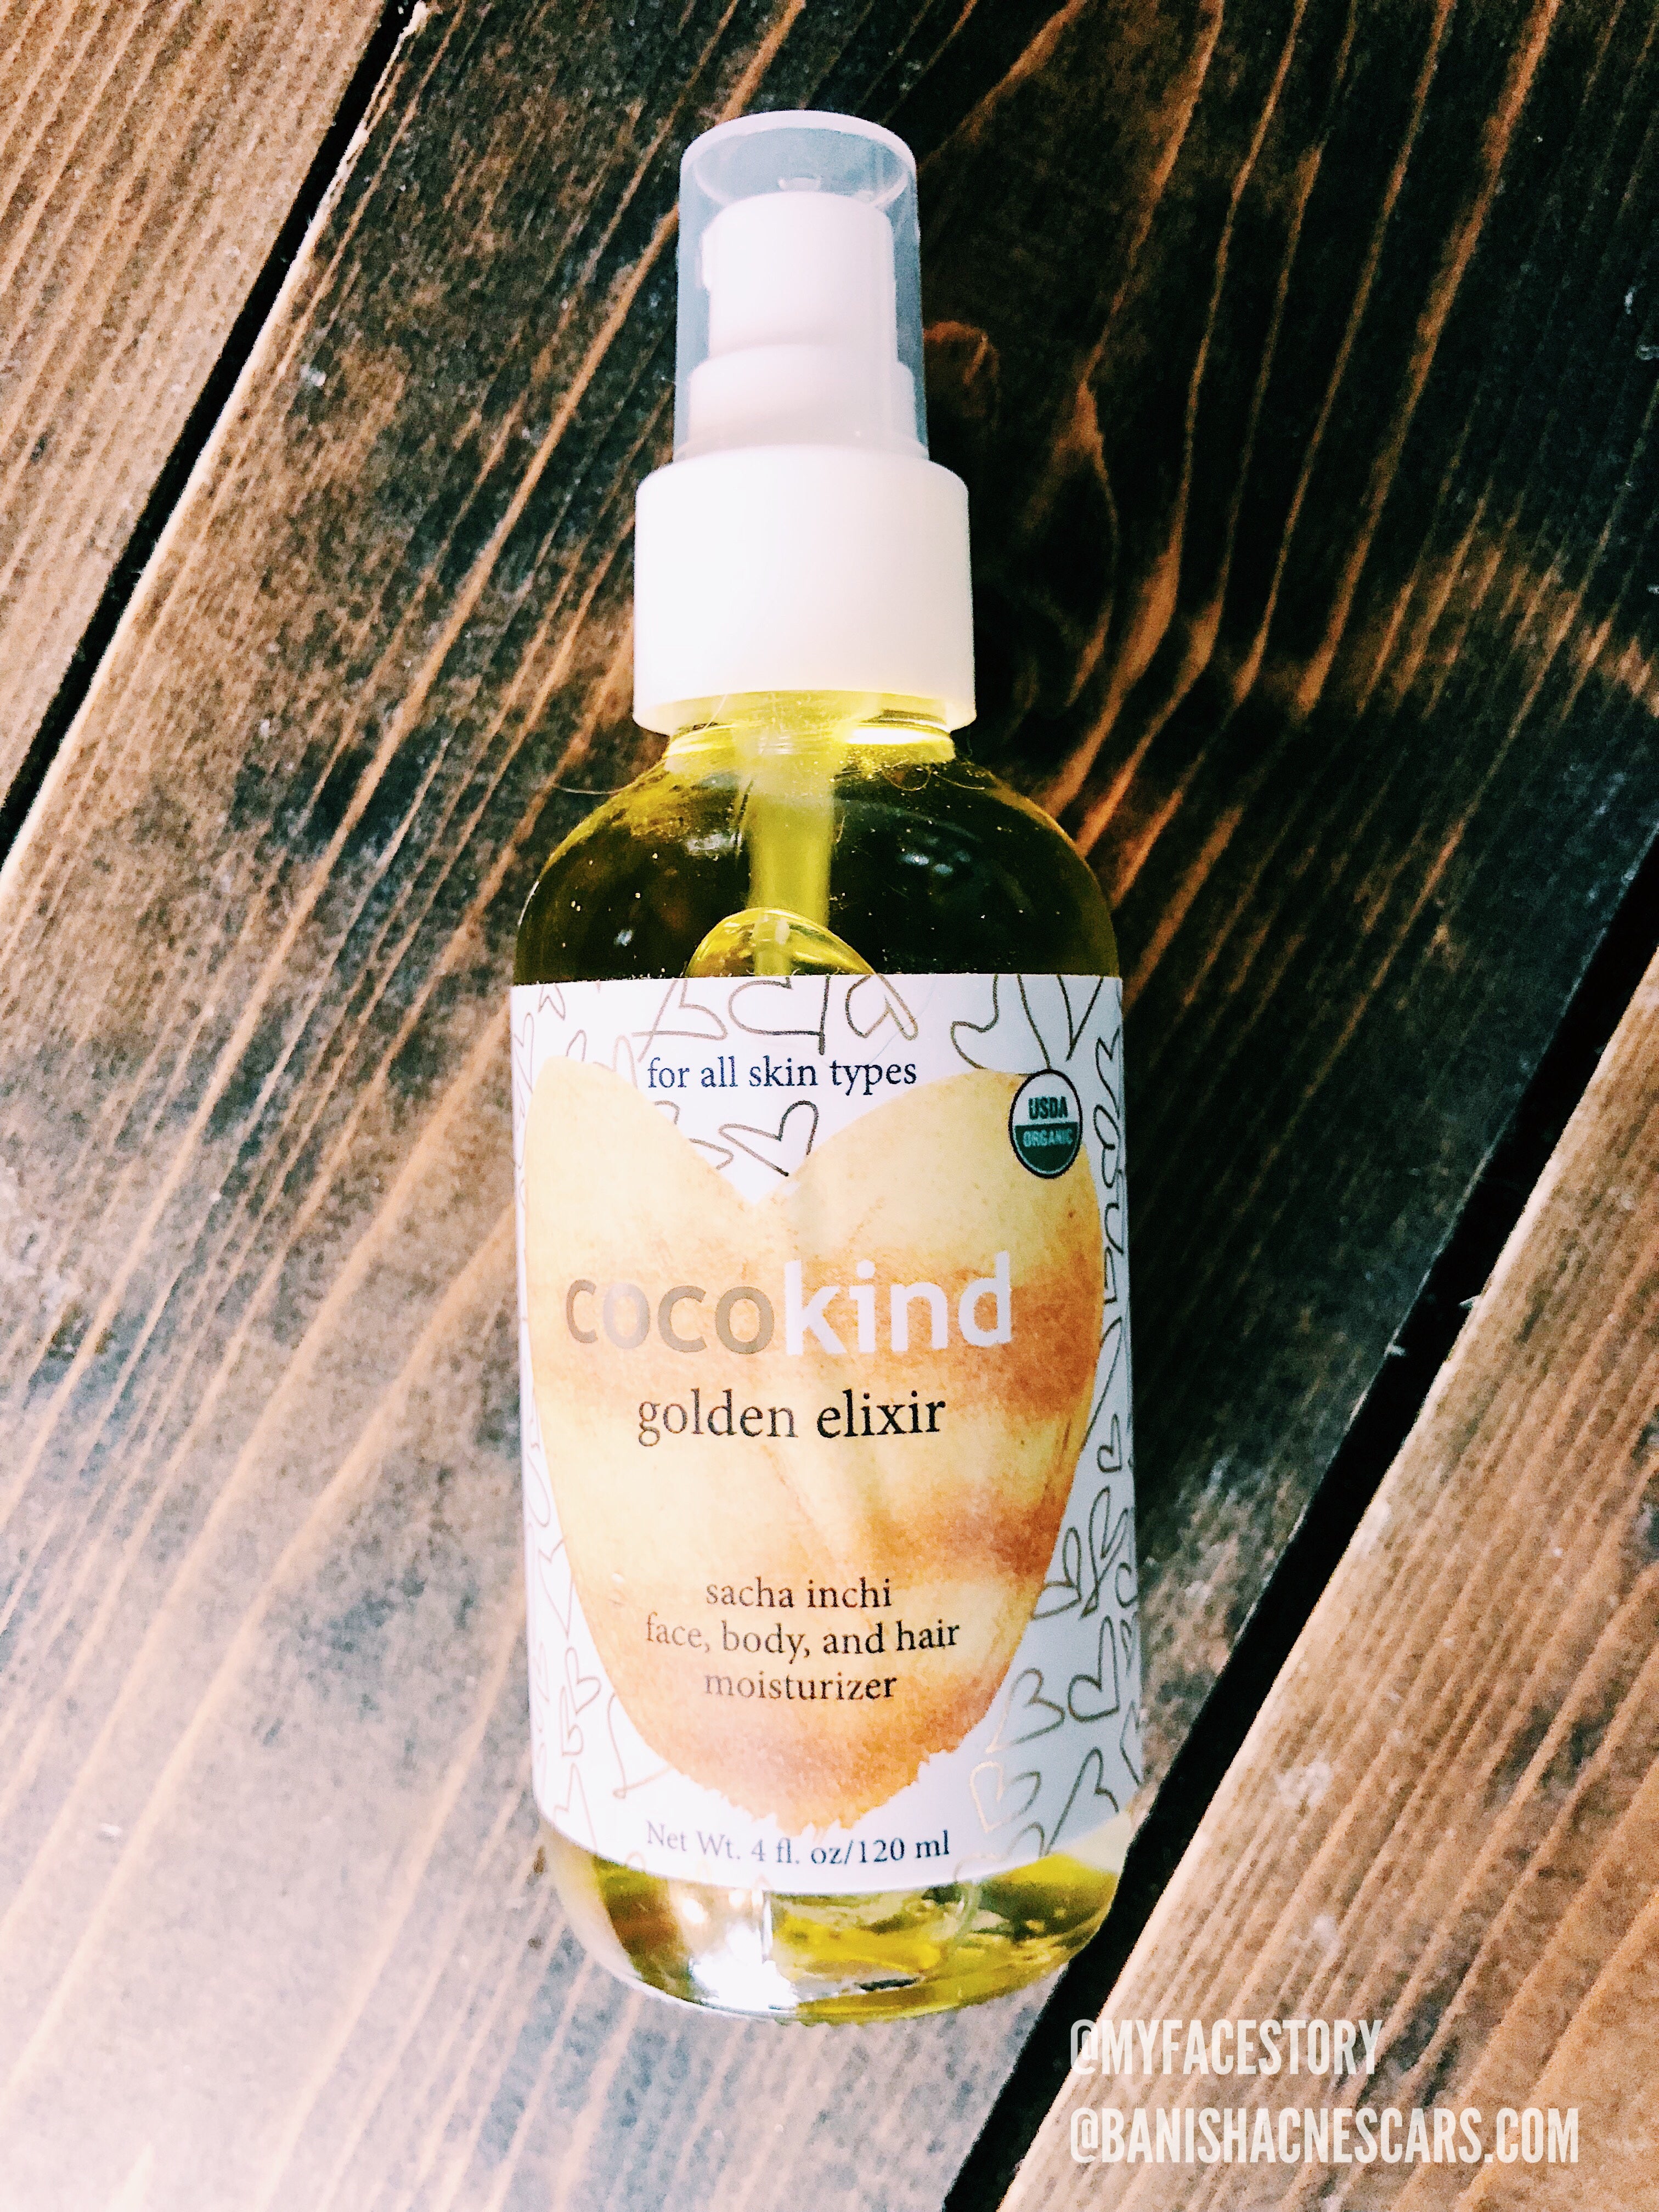 CocoKinds New Golden Elixir is The All In One Oil You Didn’t Know You Needed